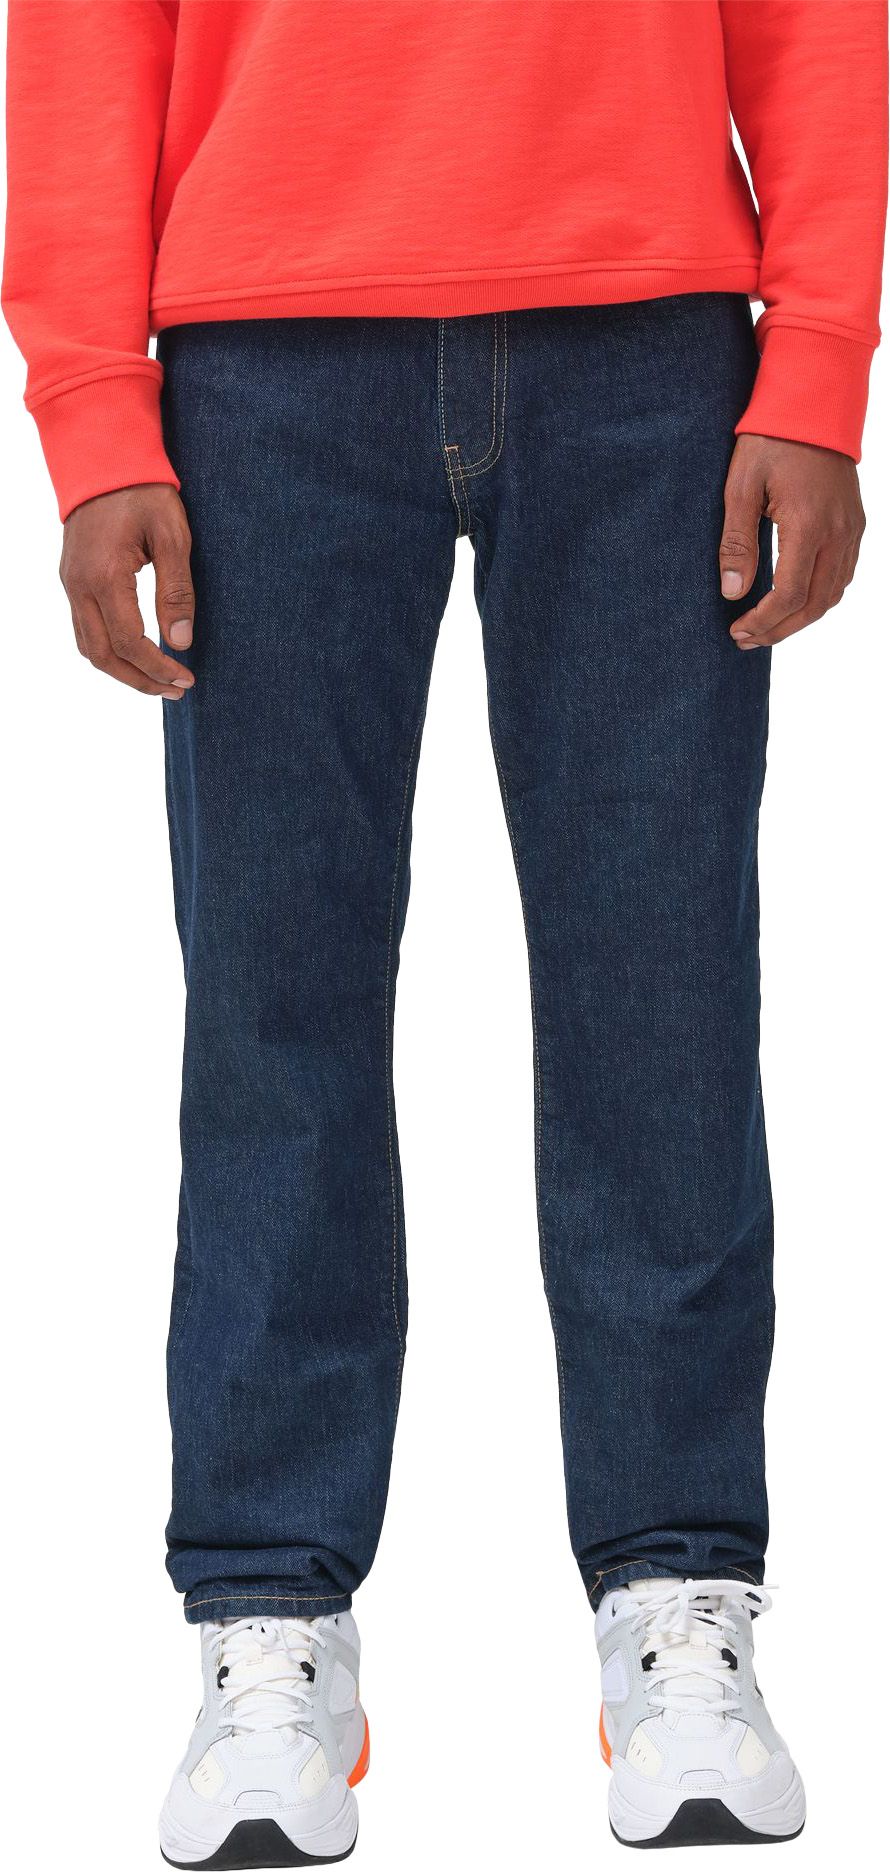 the bay levis 541